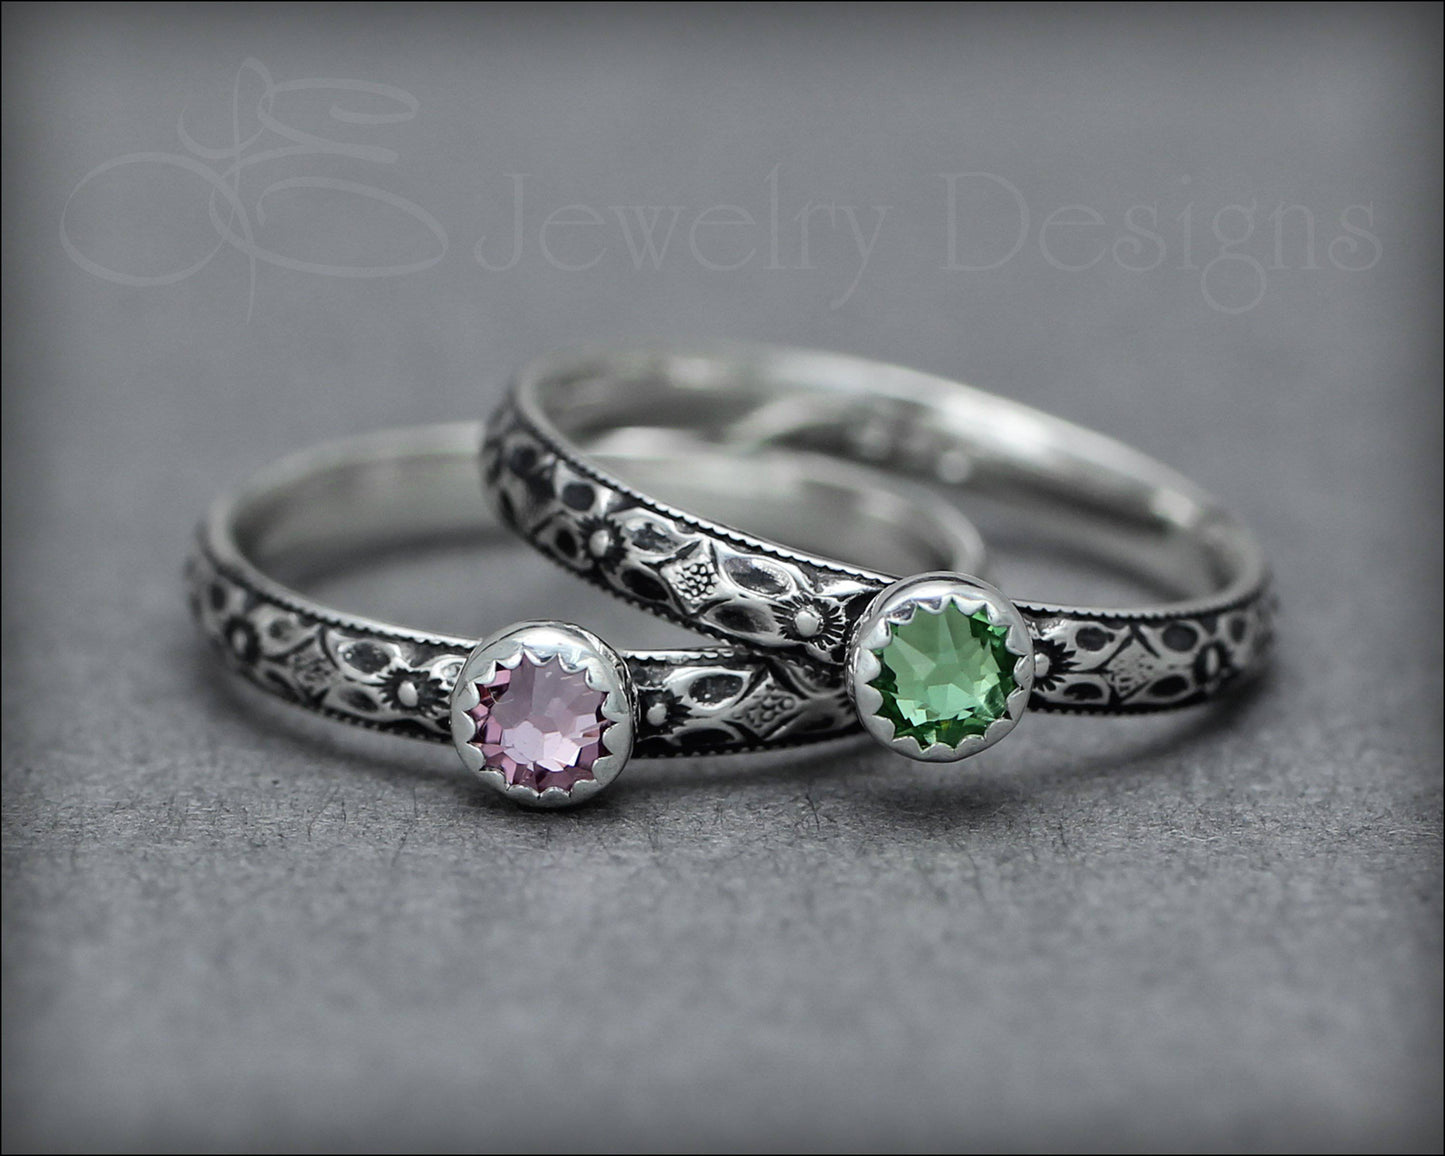 Load image into Gallery viewer, Vintage Style Birthstone or Opal Ring - LE Jewelry Designs
